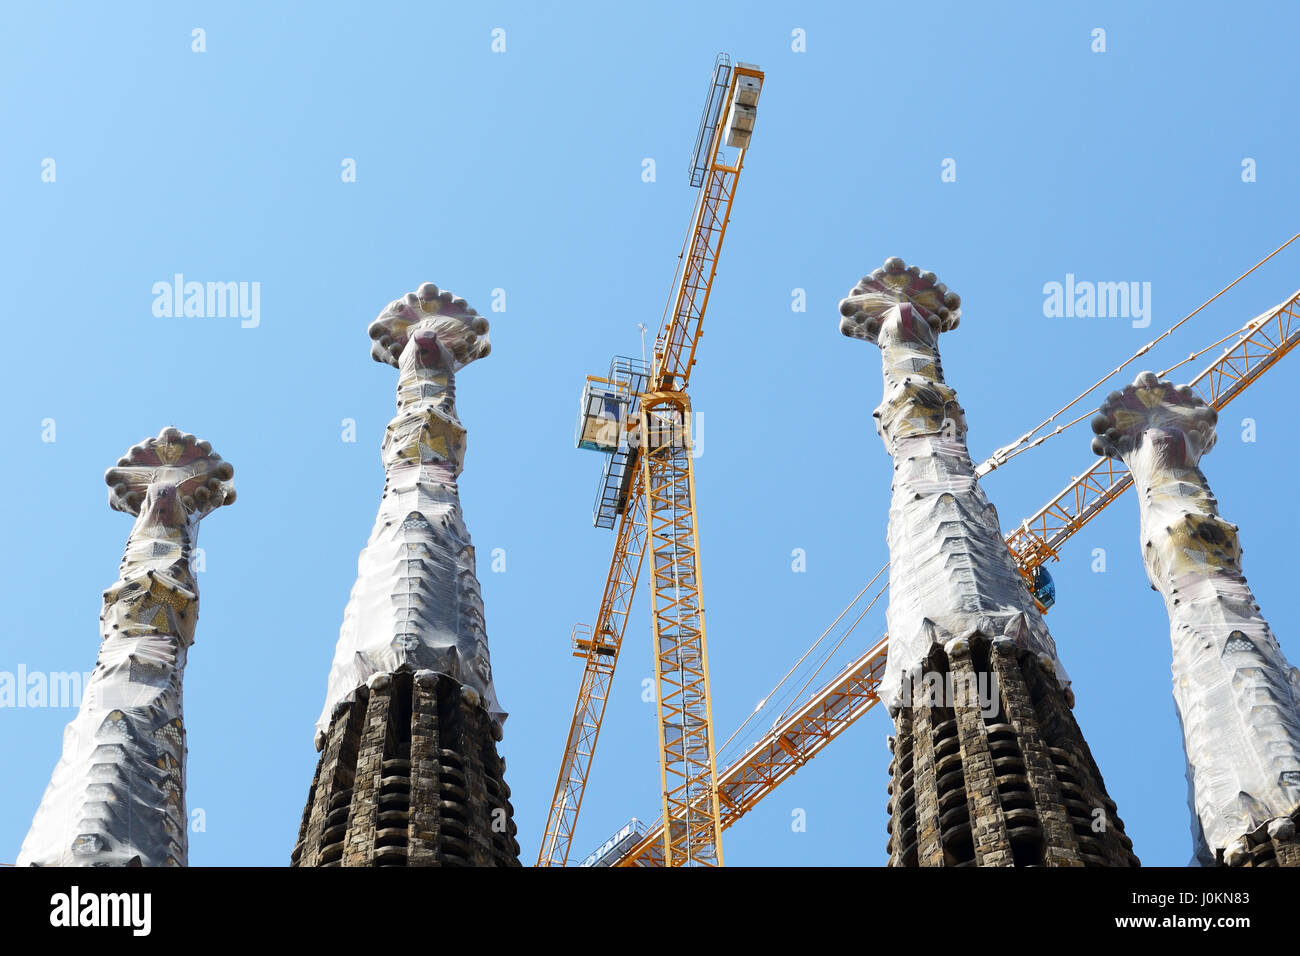 BARCELONA, SPAIN - MAY 27, 2015: View on construction of the Basilica of the Holy Family (Sagrada Familia) on May 27, 2015 in Barcelona, Spain. Up to  Stock Photo